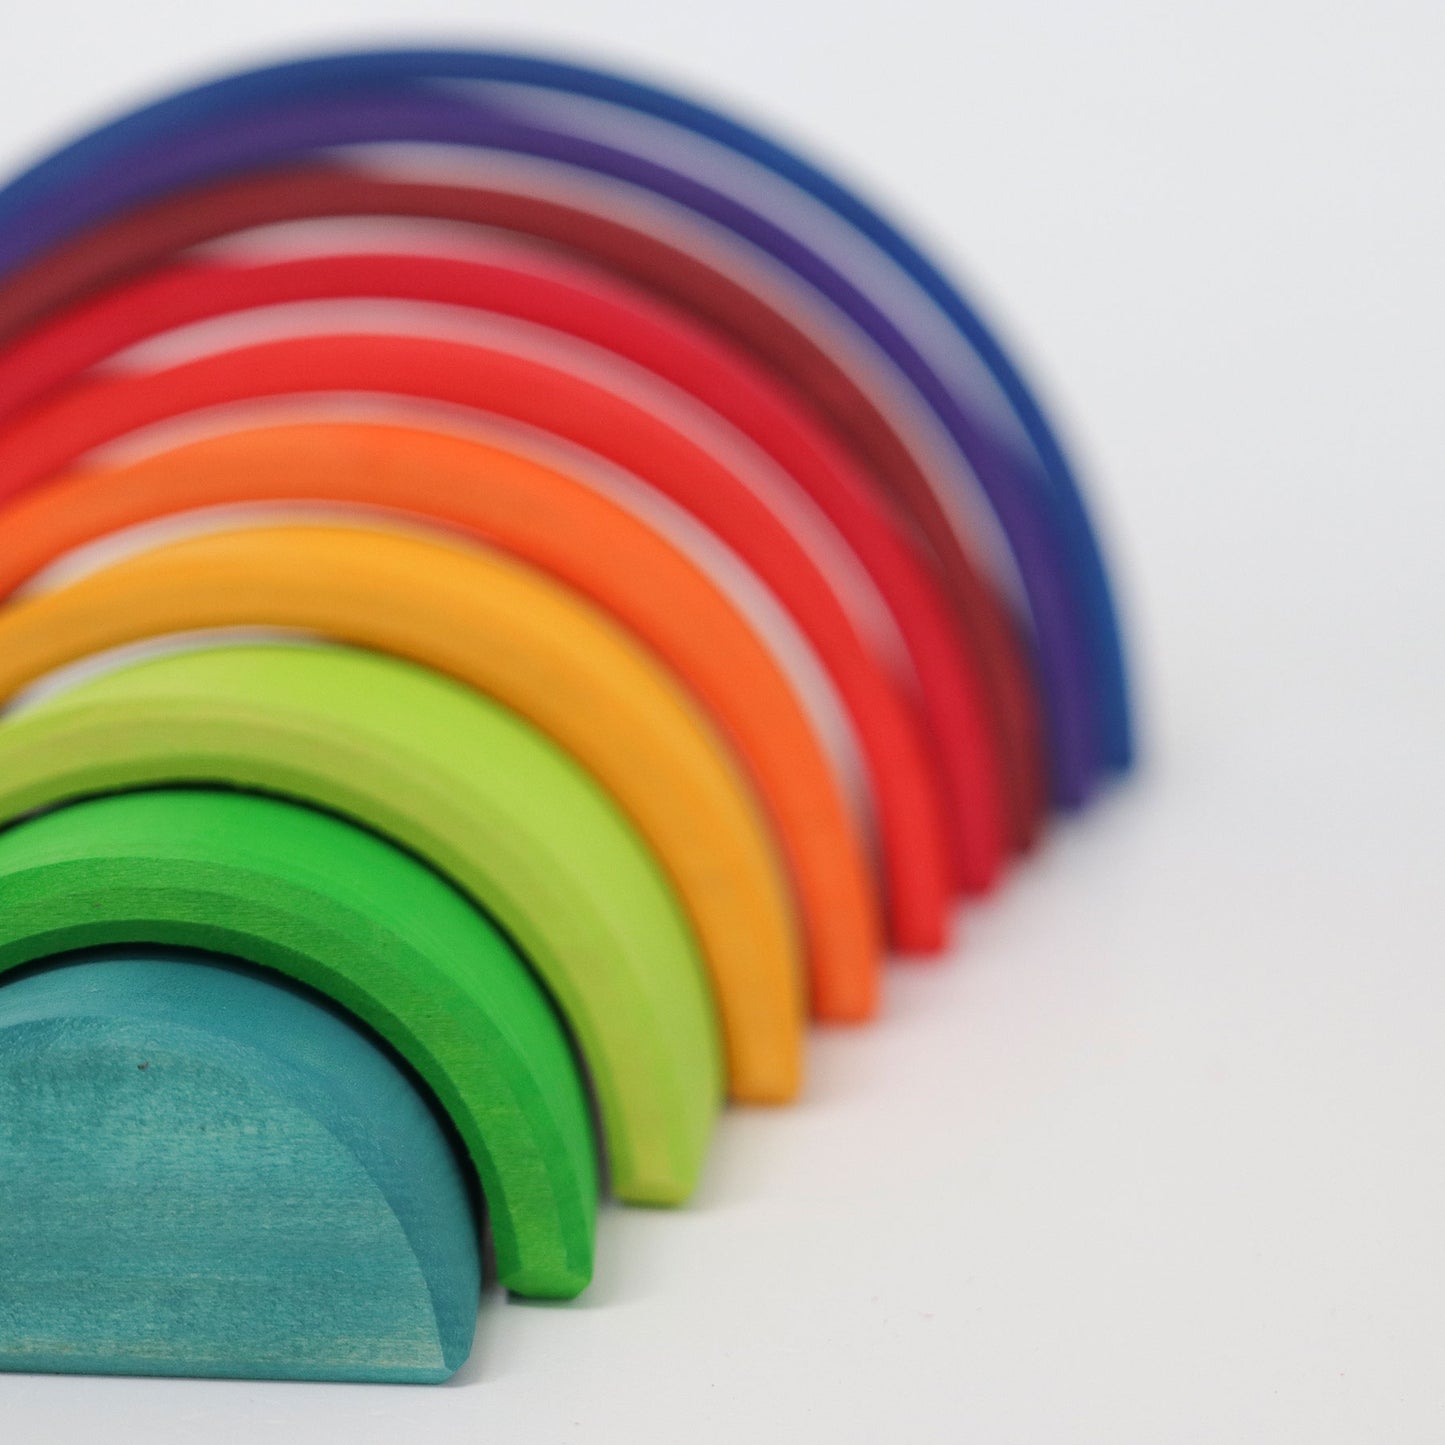 Grimm's - Large Counting Rainbow (10 Pieces)